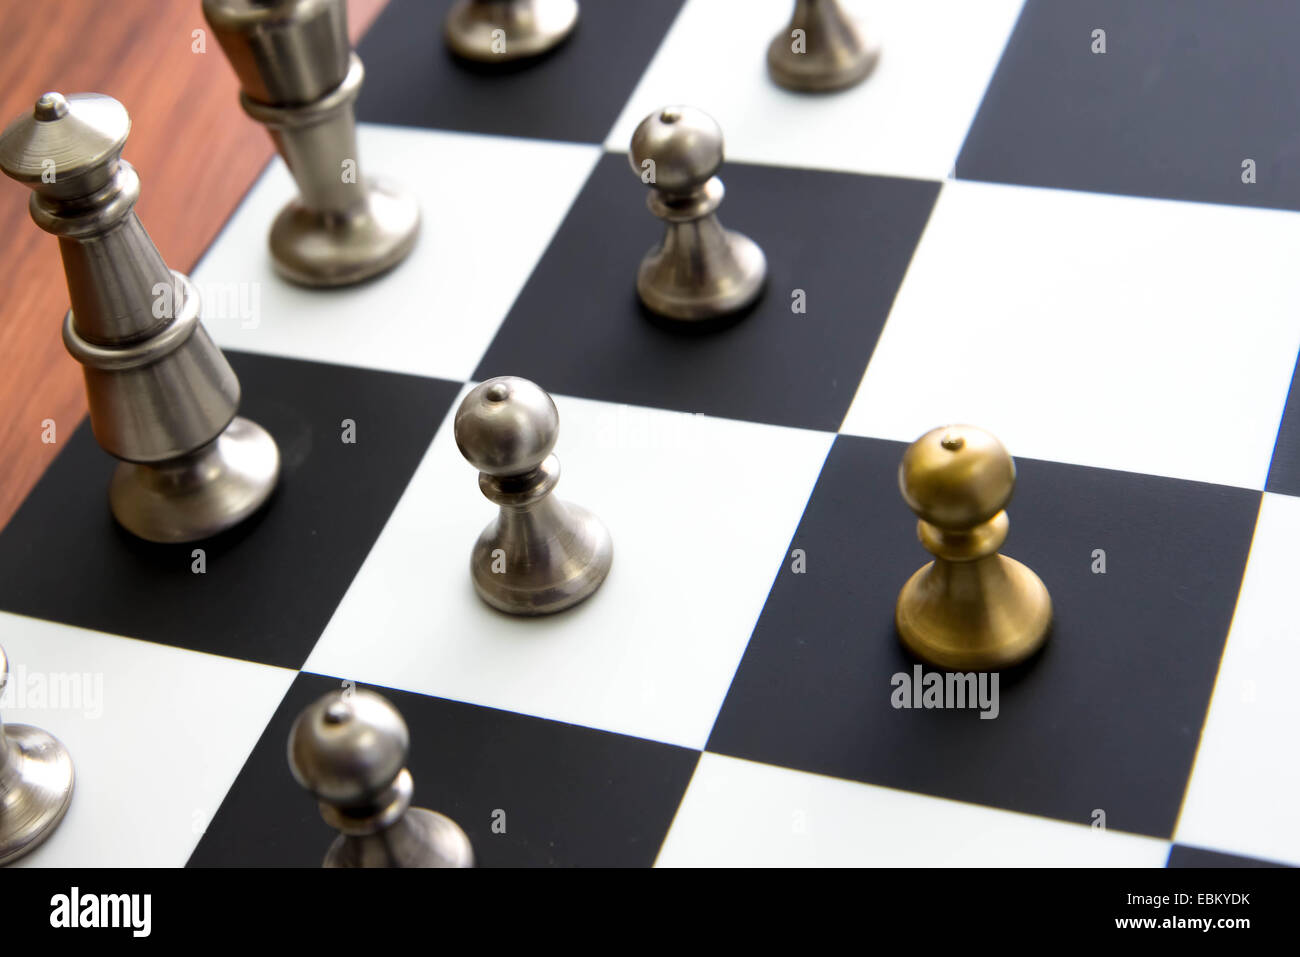 How to Play Chess DK Very Good